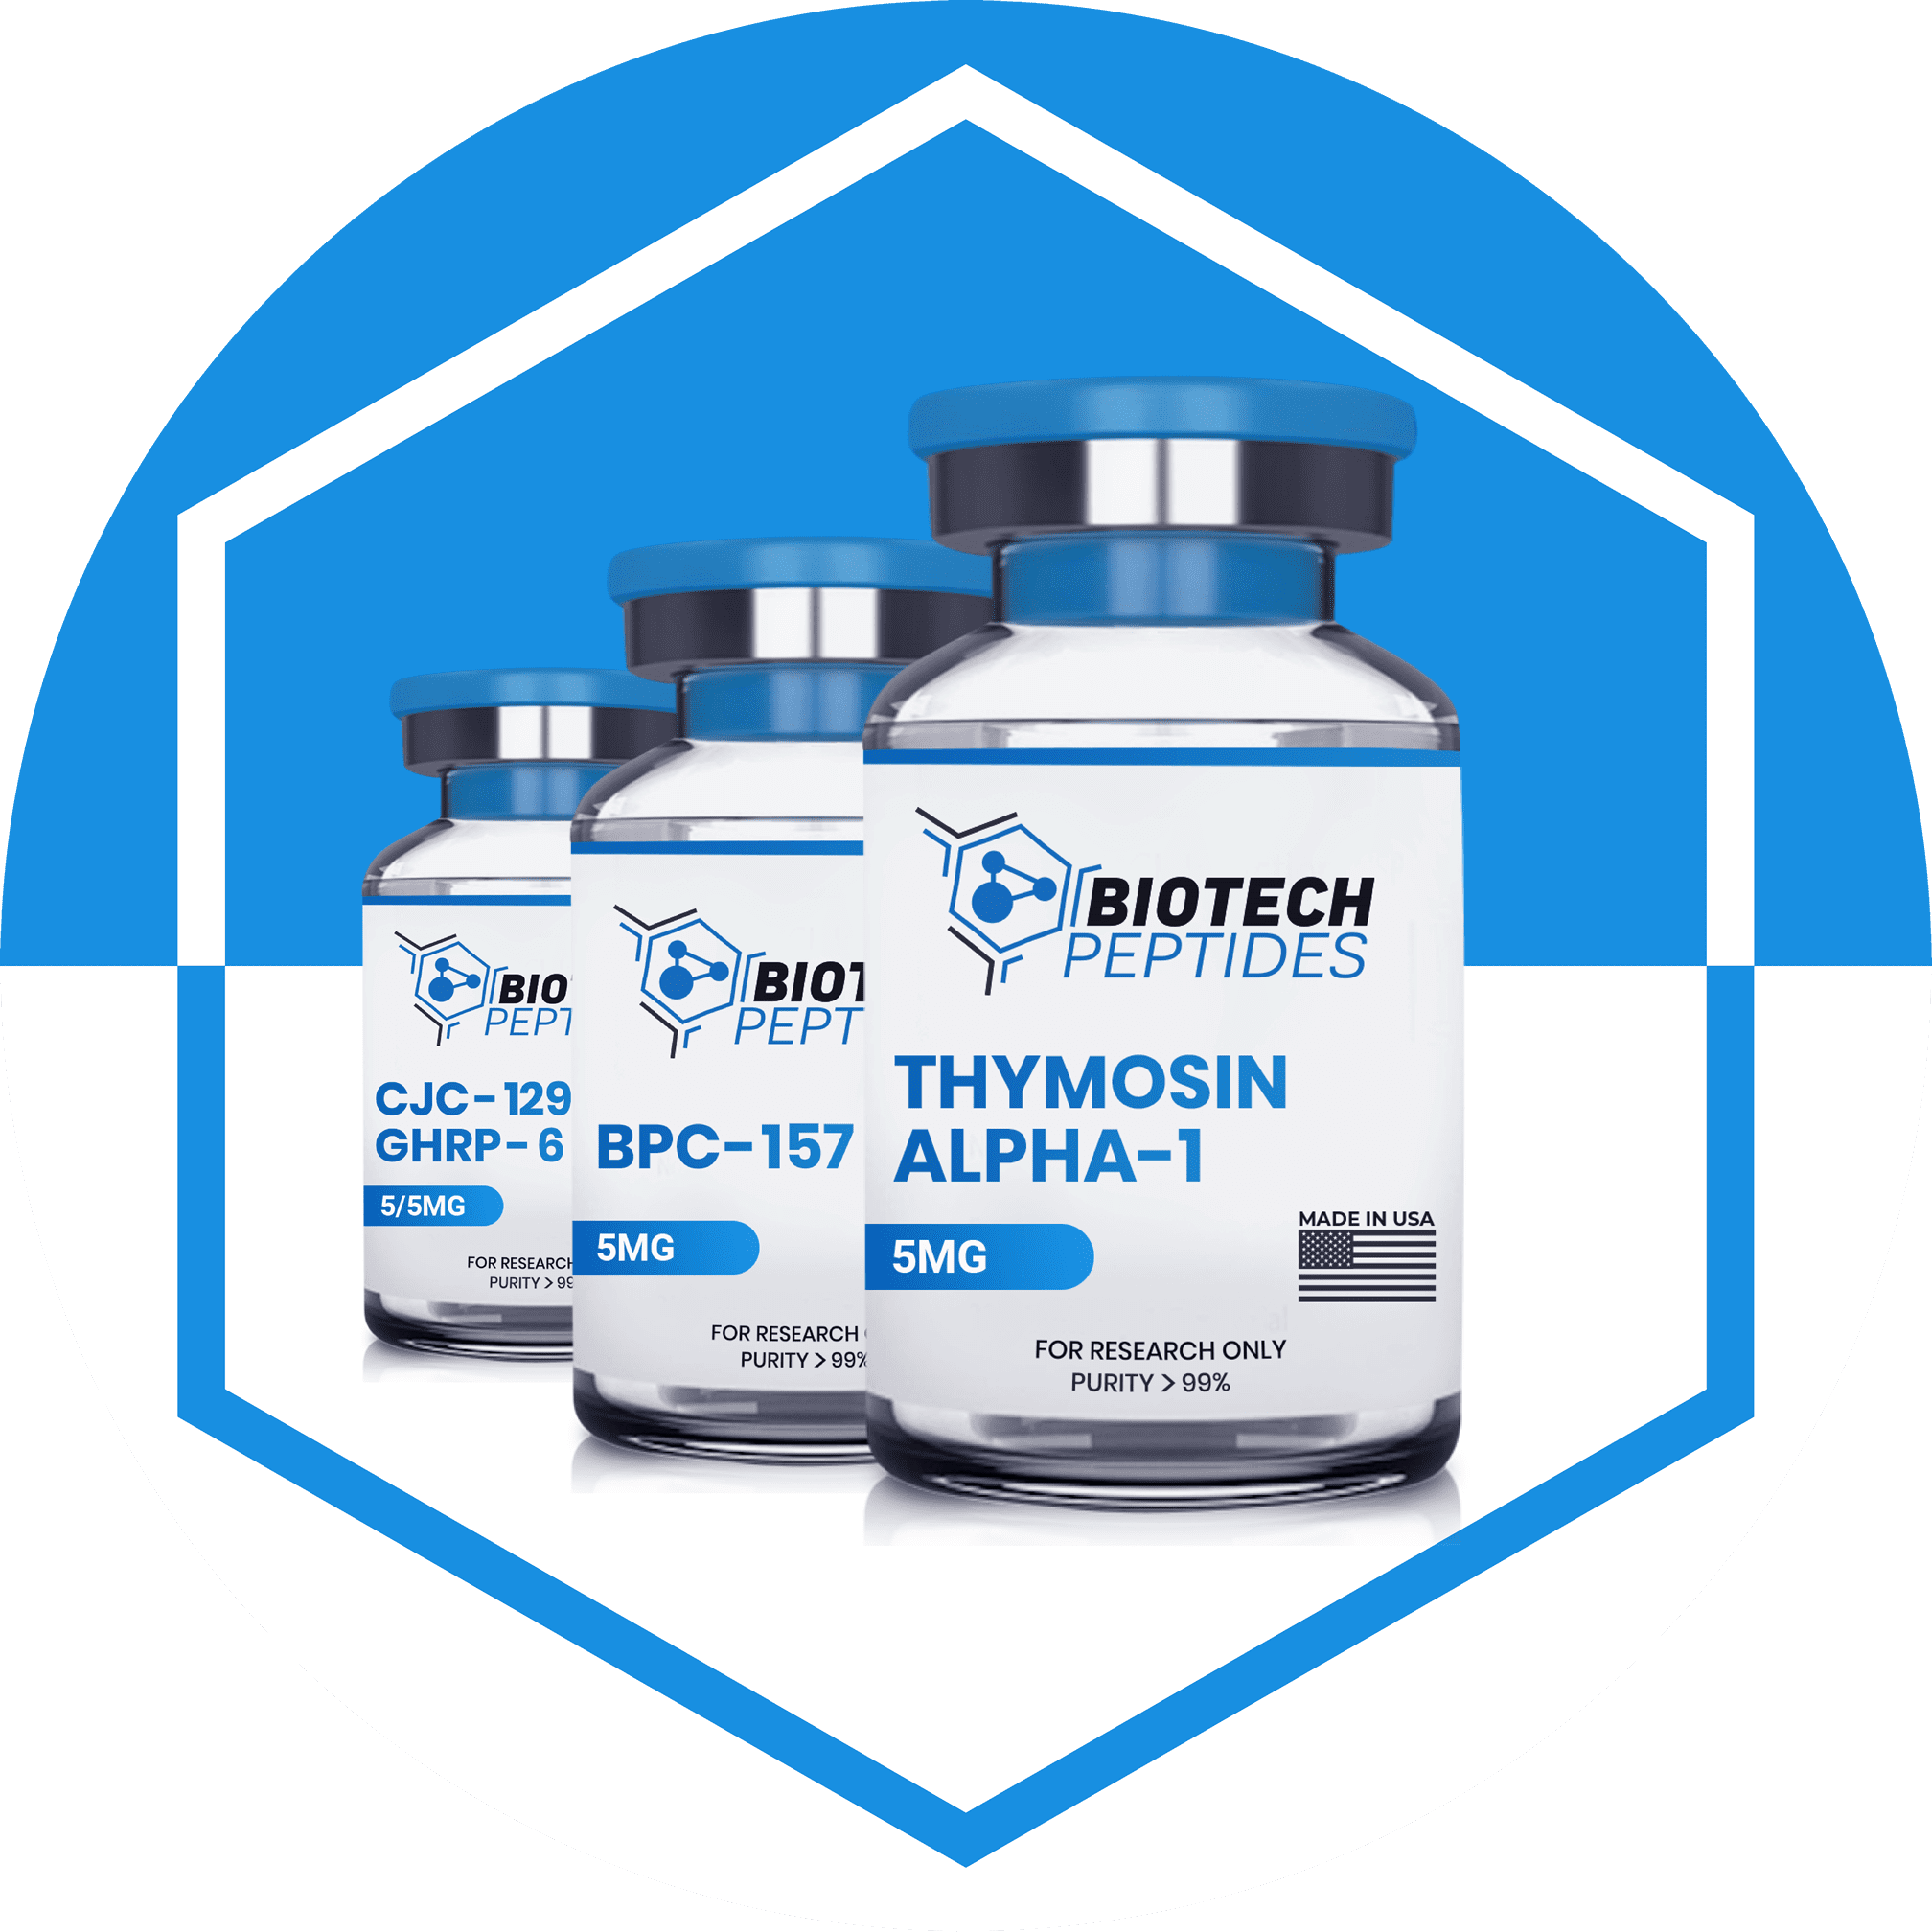 About BiotechPeptides